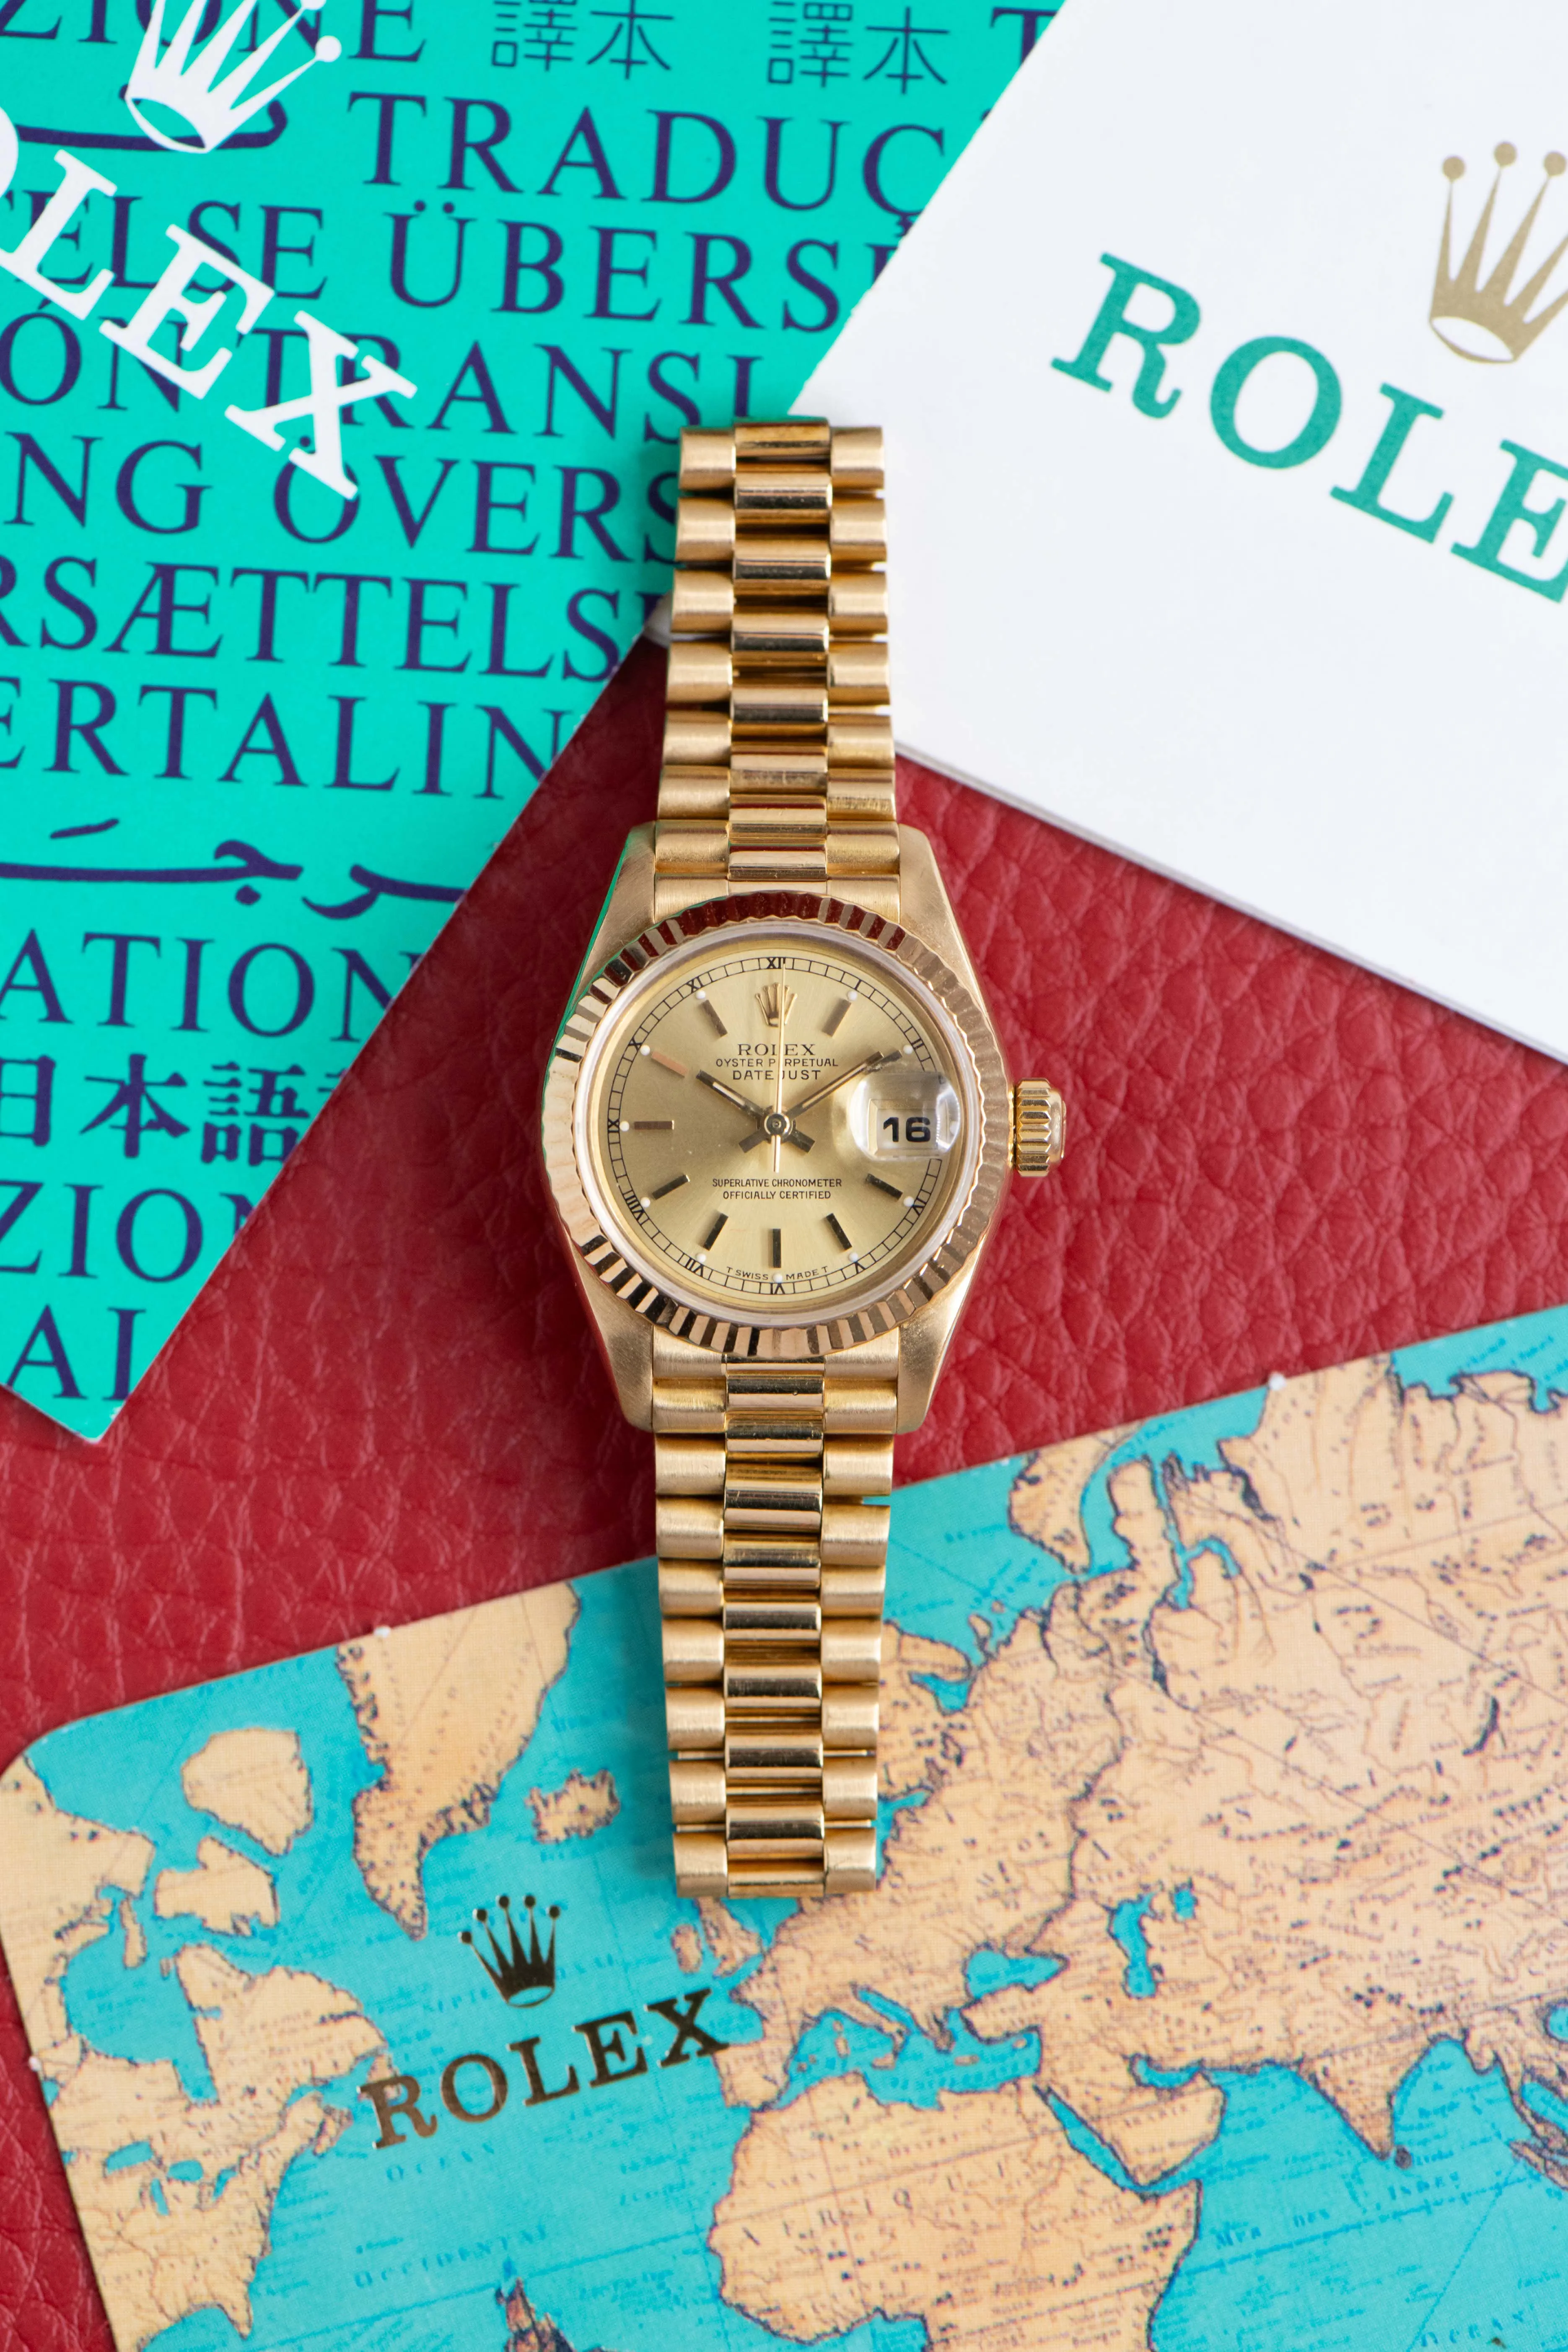 Rolex Lady-Datejust 69178 26mm Yellow gold Champagne 4